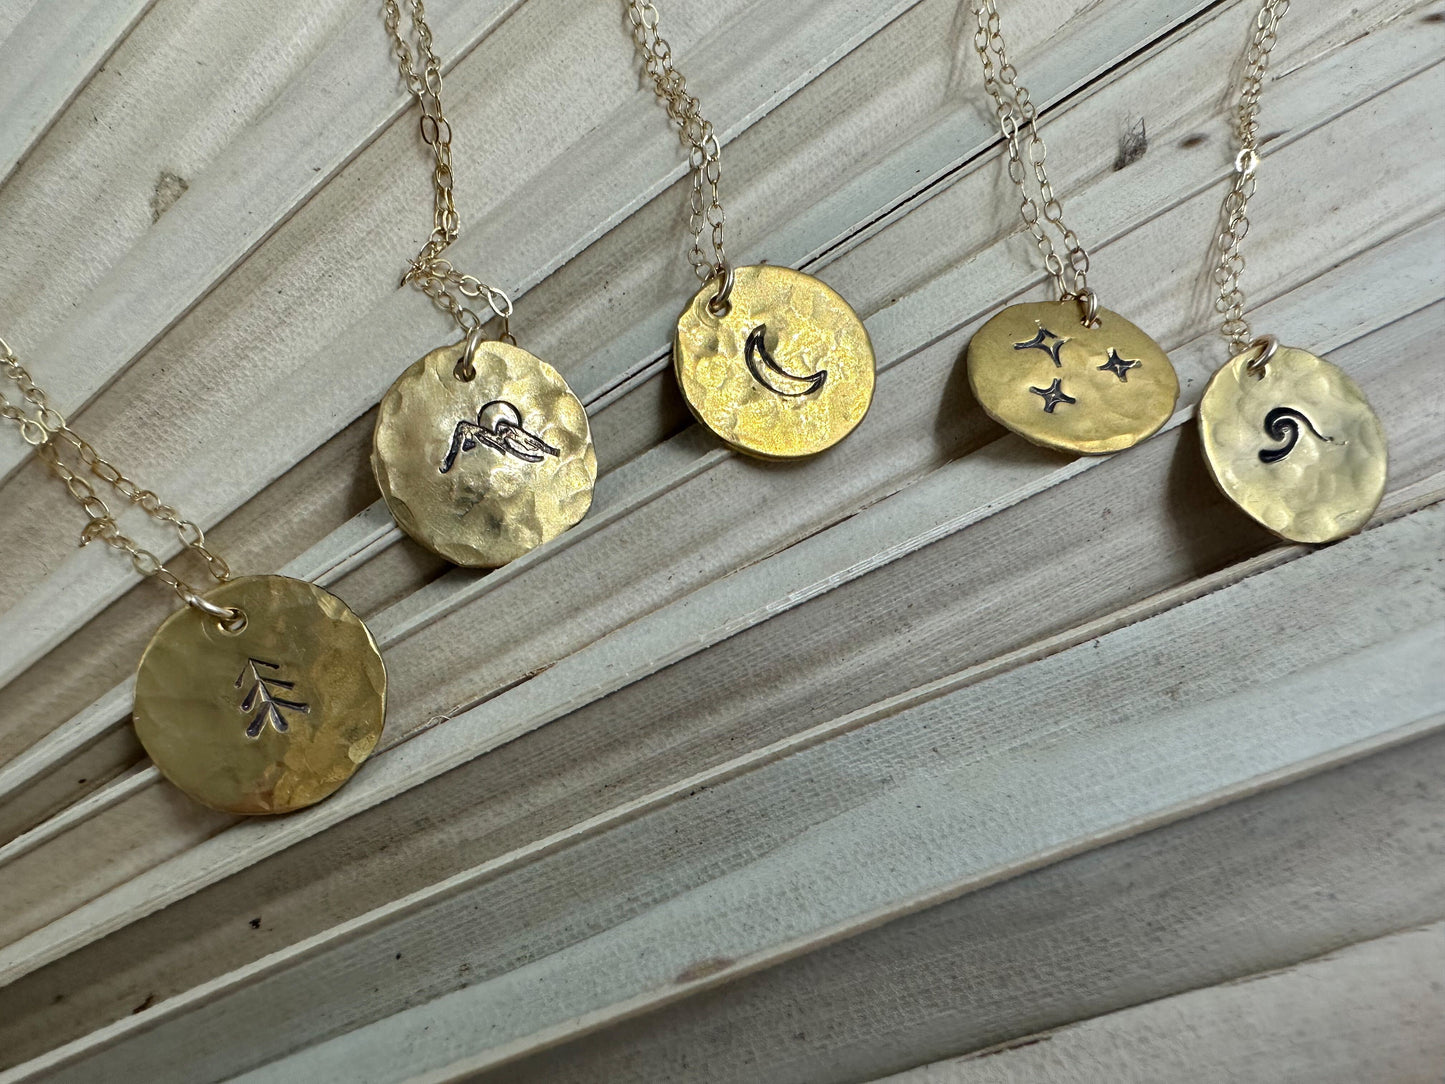 Hammered Coin Necklaces